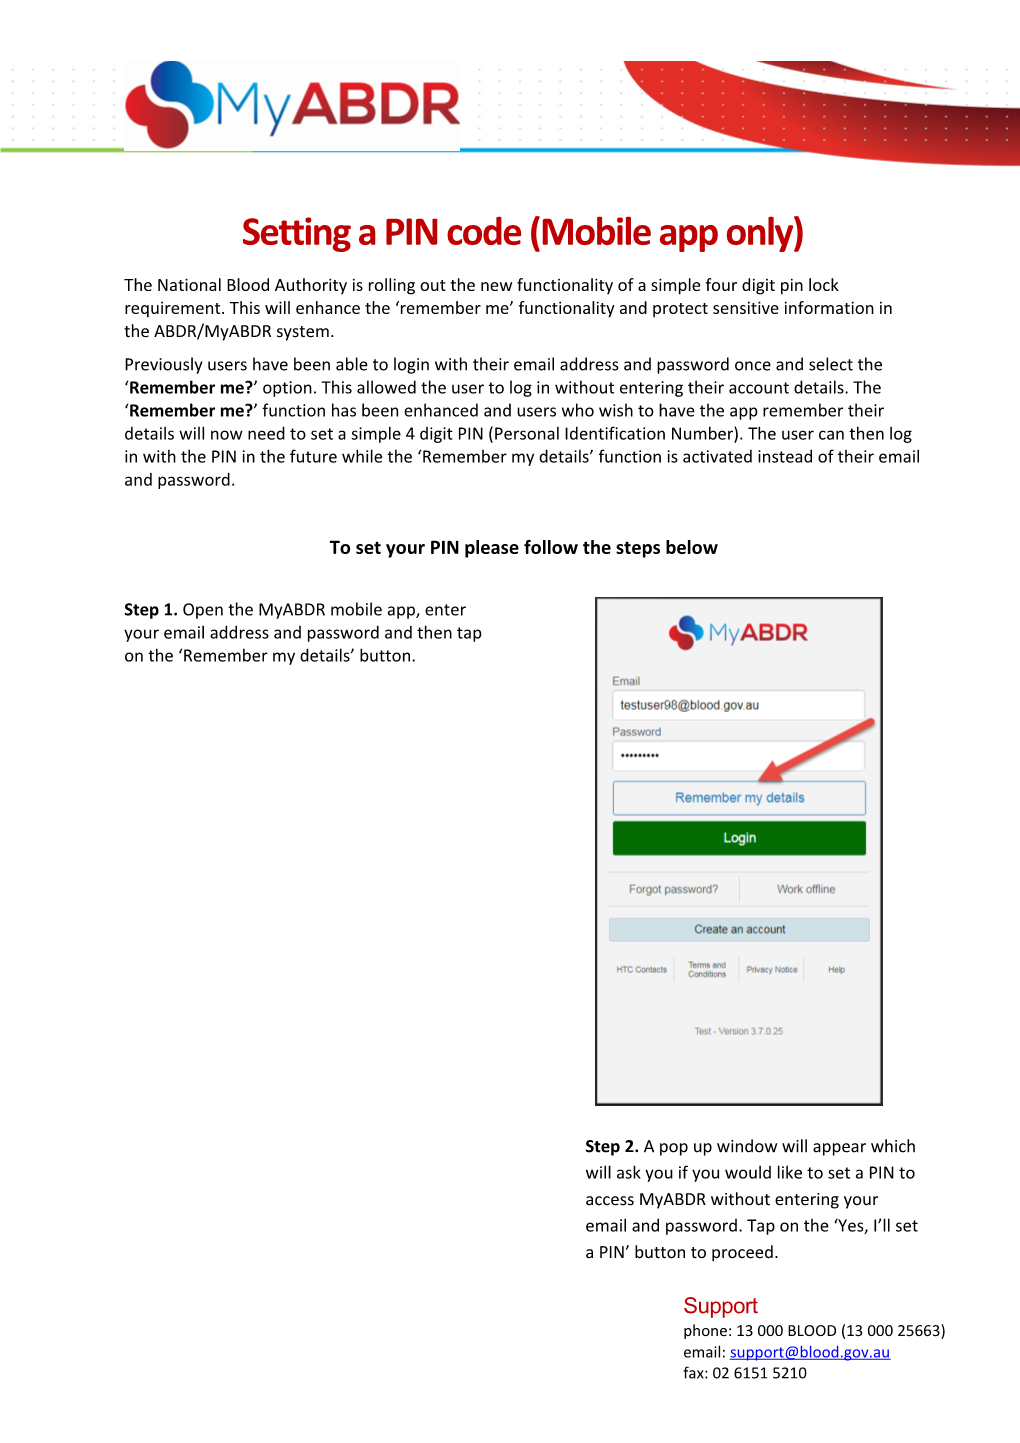 Setting a PIN Code (Mobile App Only)